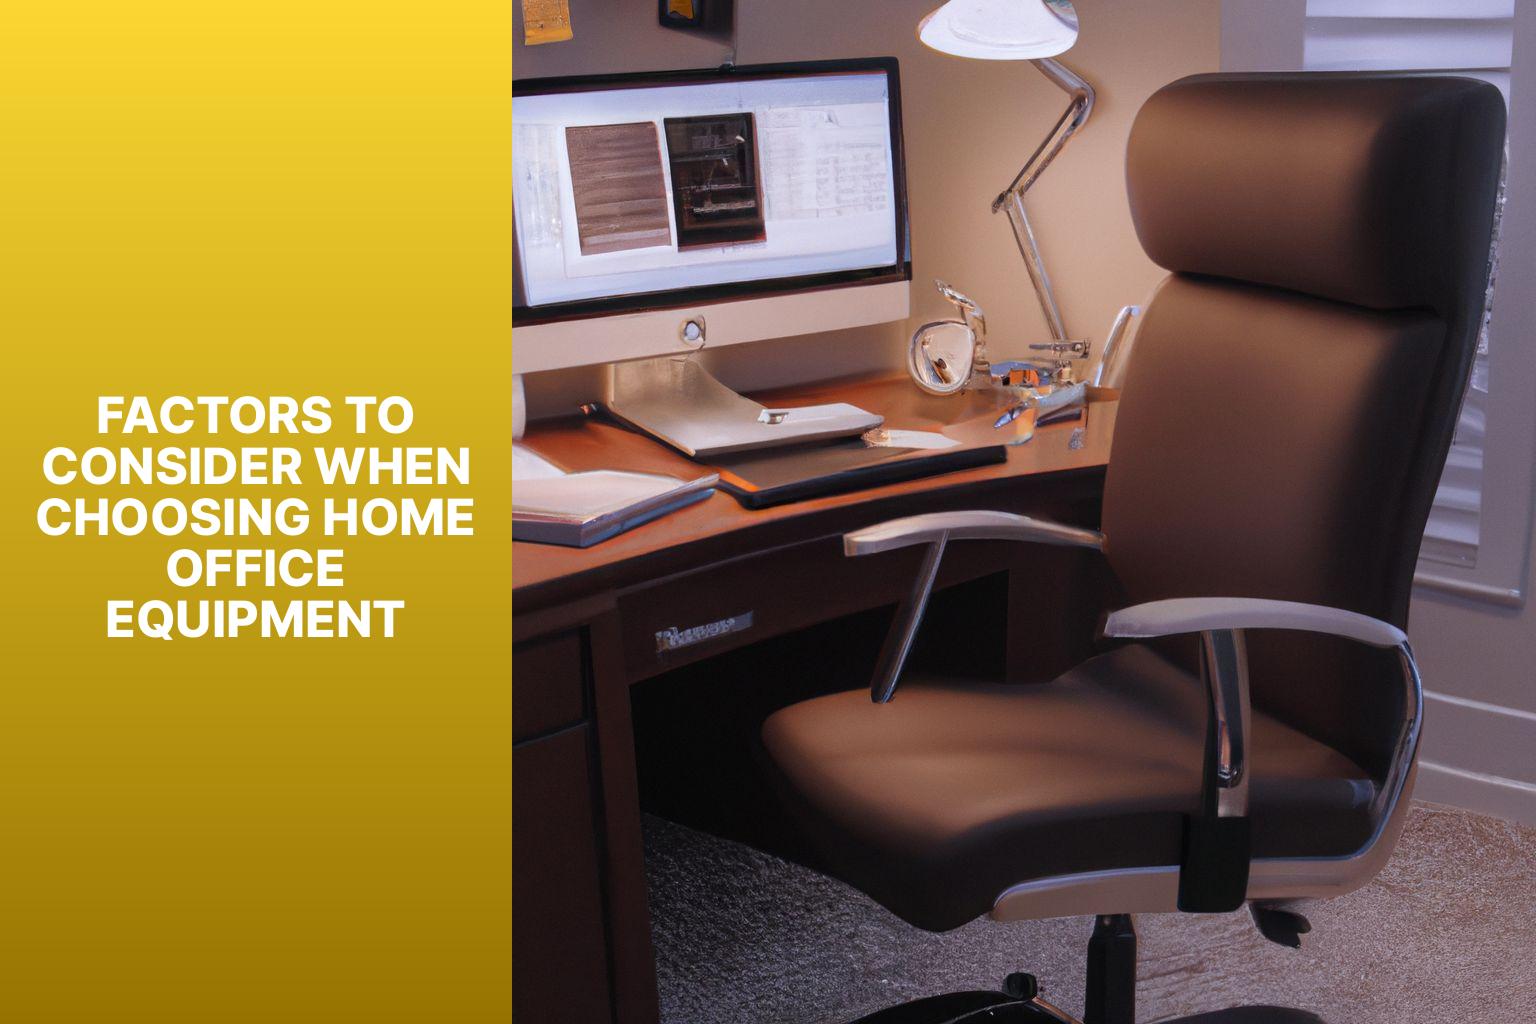 Factors to Consider When Choosing Home Office Equipment - How to Choose the Right Home Office Equipment 